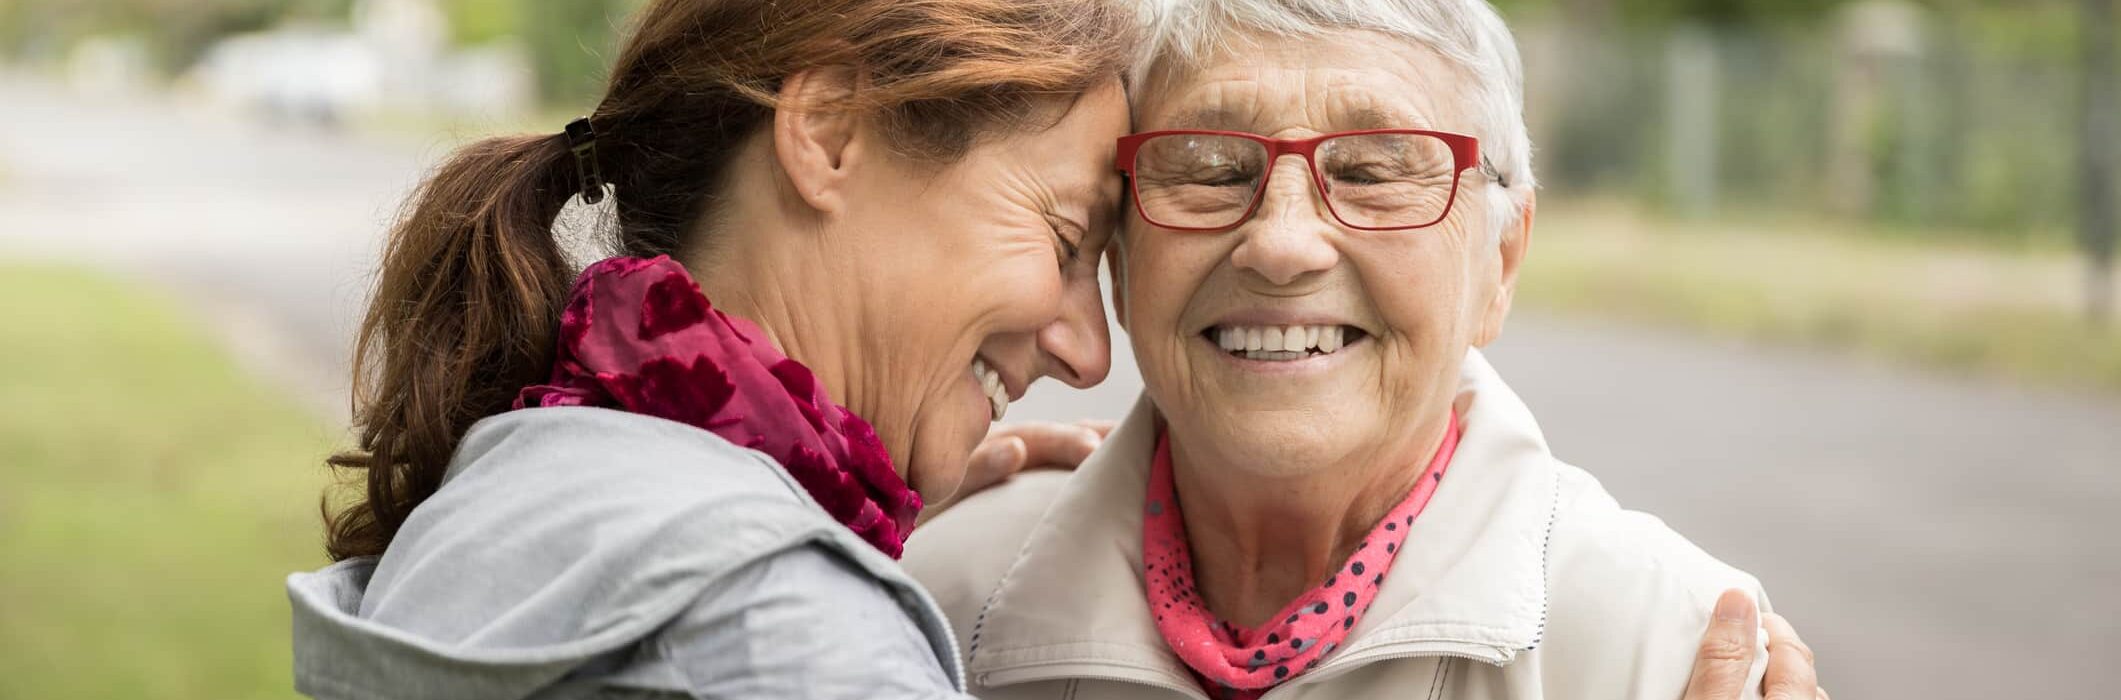 Happy senior woman and caregiver walking outdoors